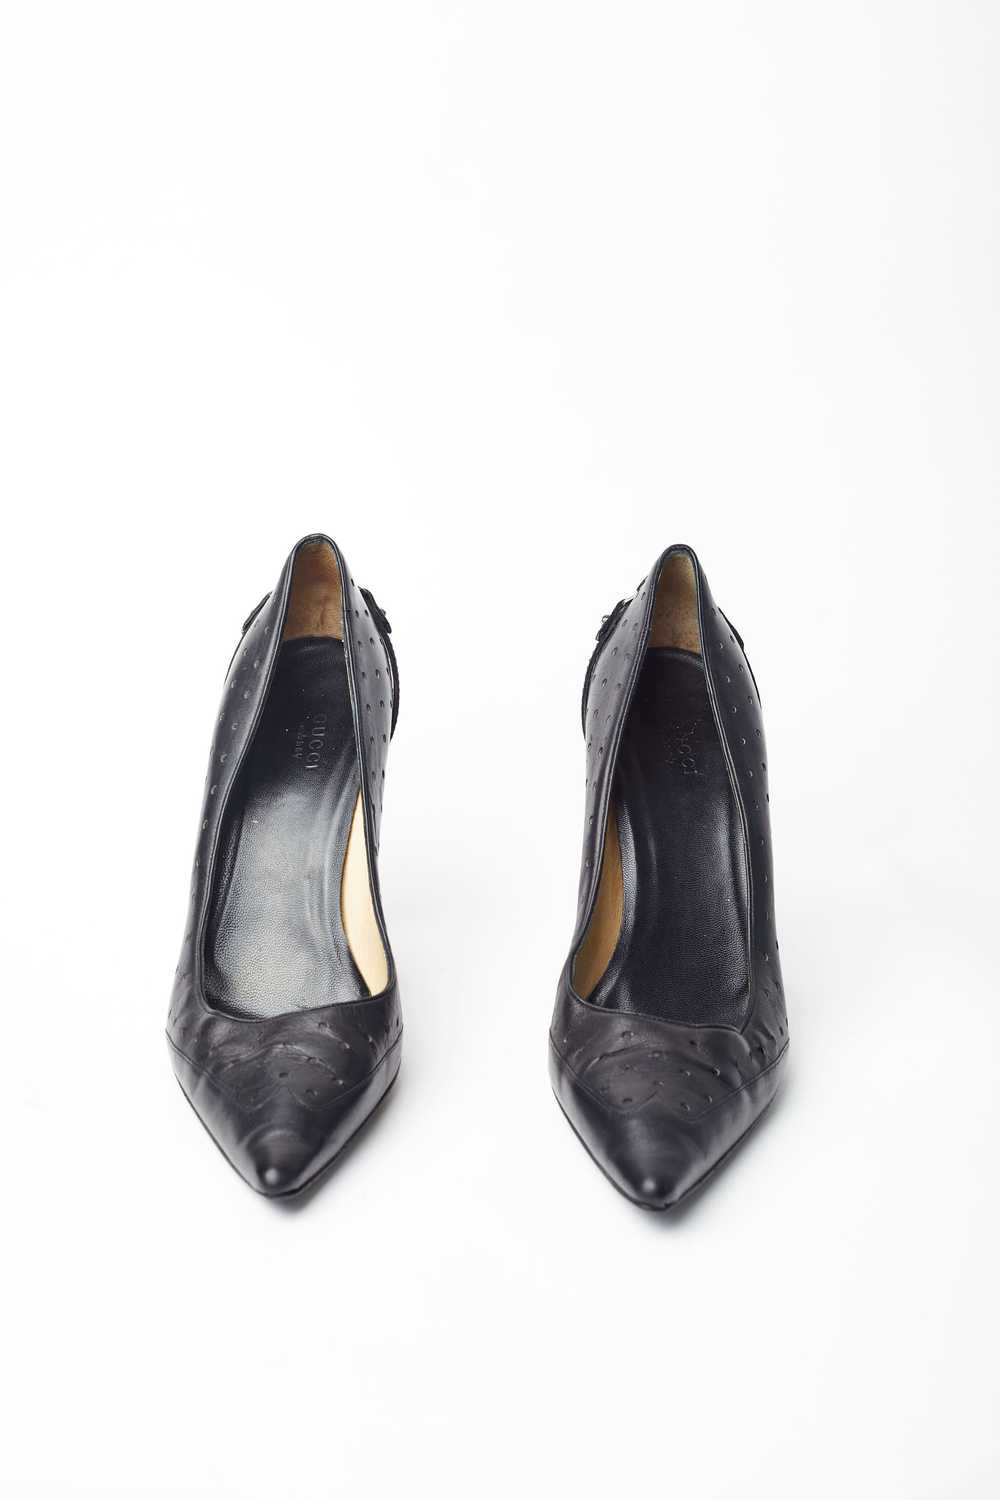 Gucci Y2K Tom Ford perforated leather logo pumps - image 7